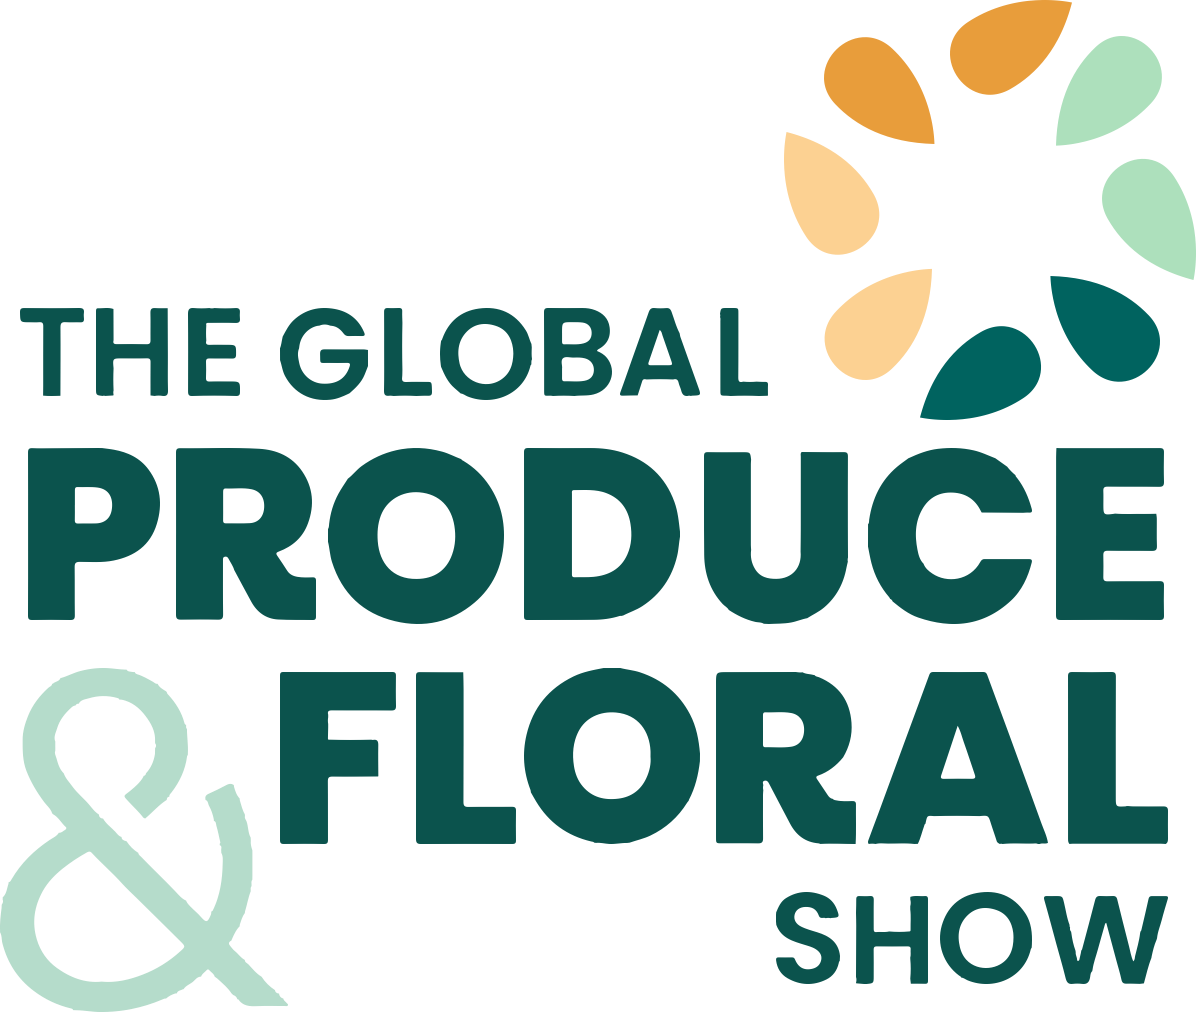 Global Produce & Floral Show